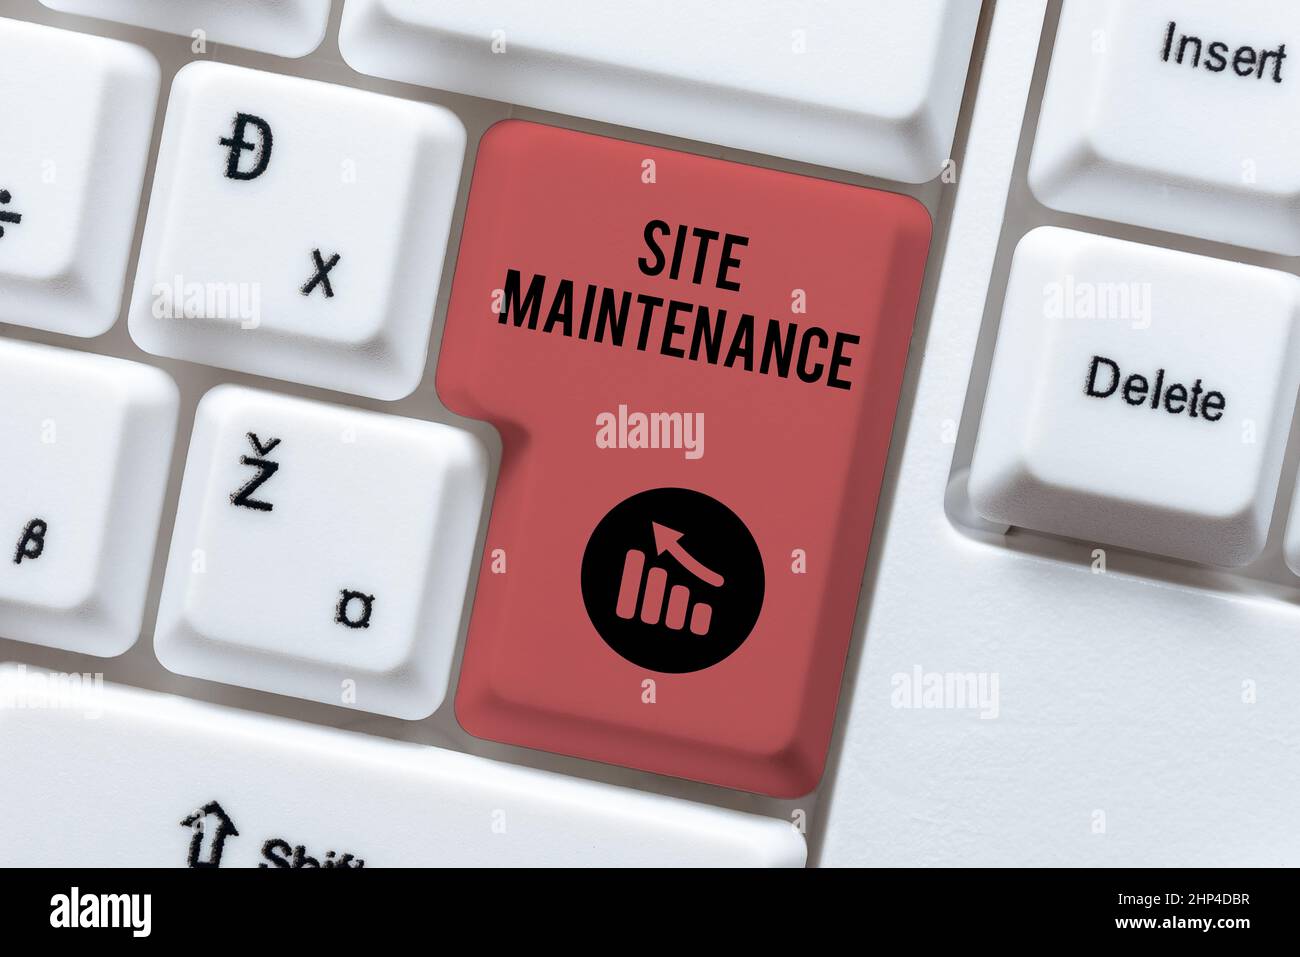 Sign displaying Site Maintenance, Business concept Monitoring and regularly checking your website for issues Abstract Presenting Ethical Hacker, Typin Stock Photo